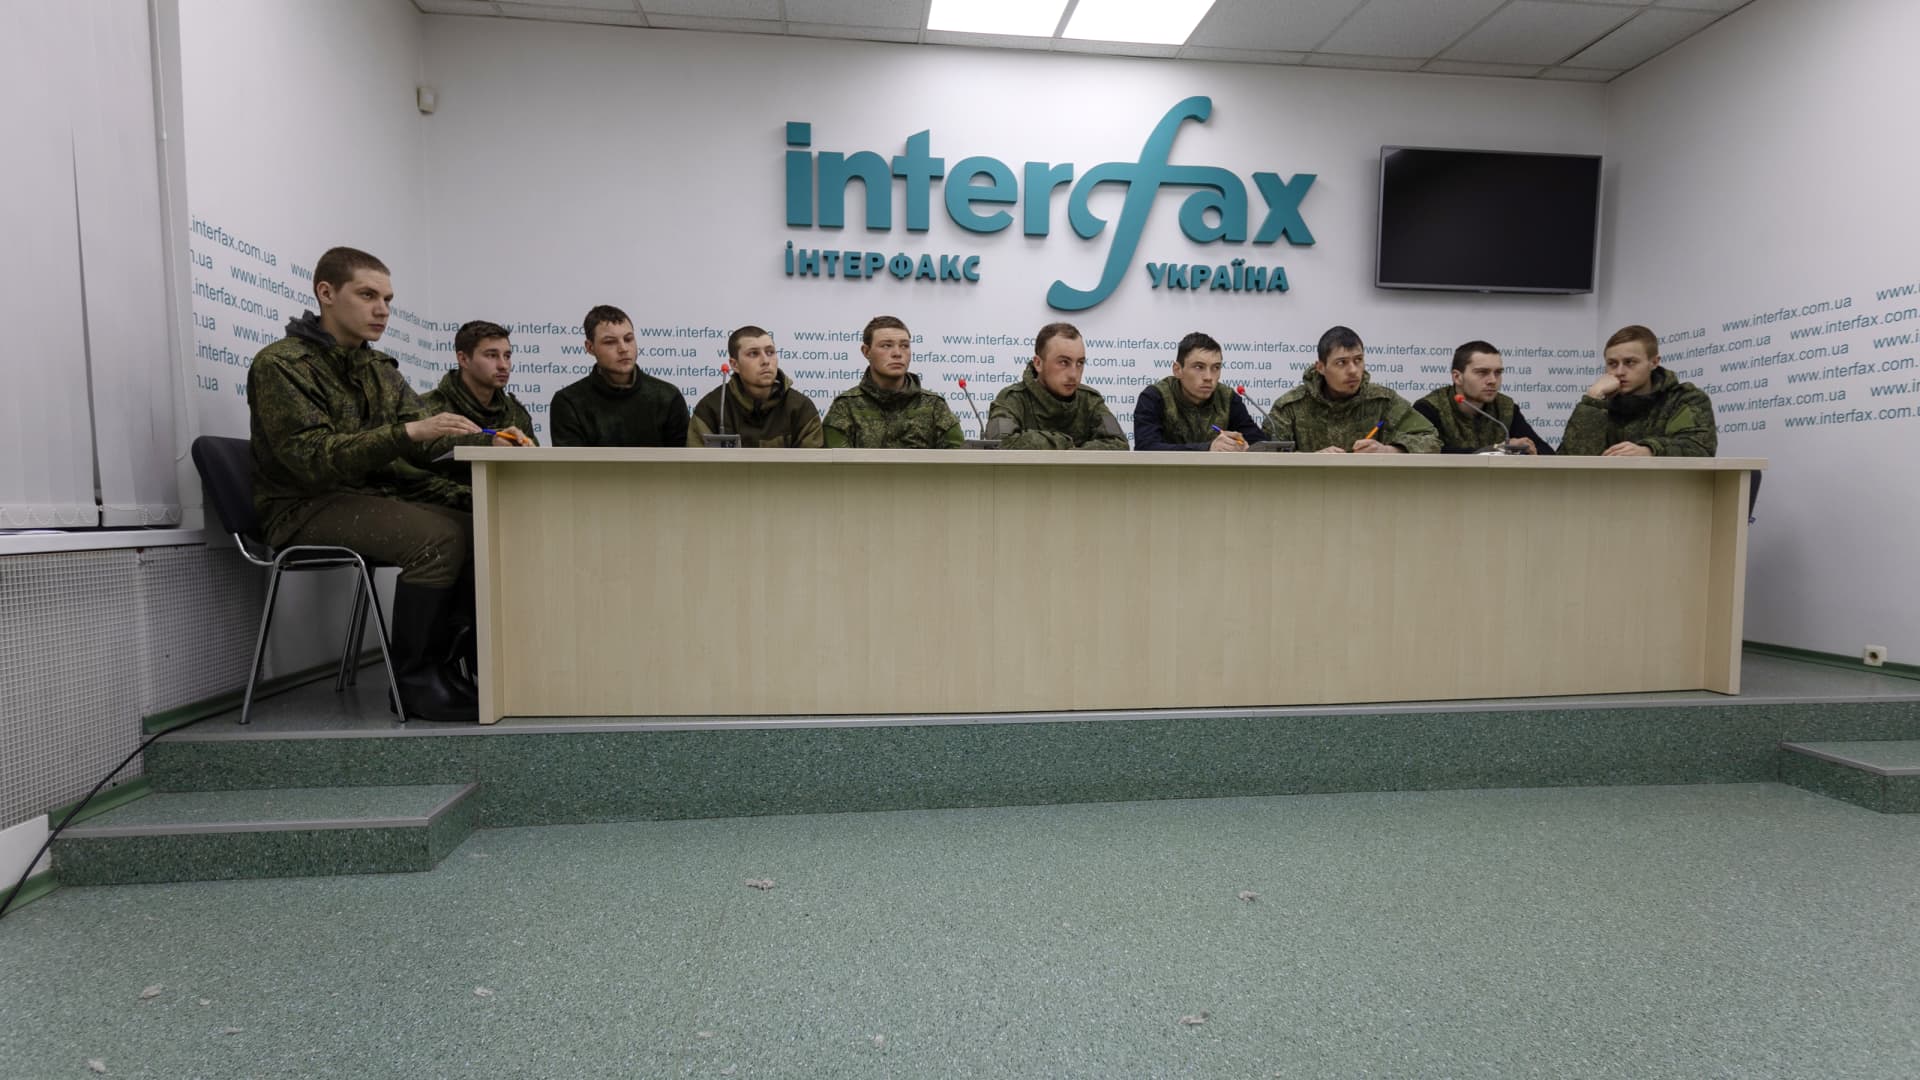 Eleven russian soldiers captured by Ukrainian forces make a press statement on March 5, 2022 in Kyiv, Ukraine.